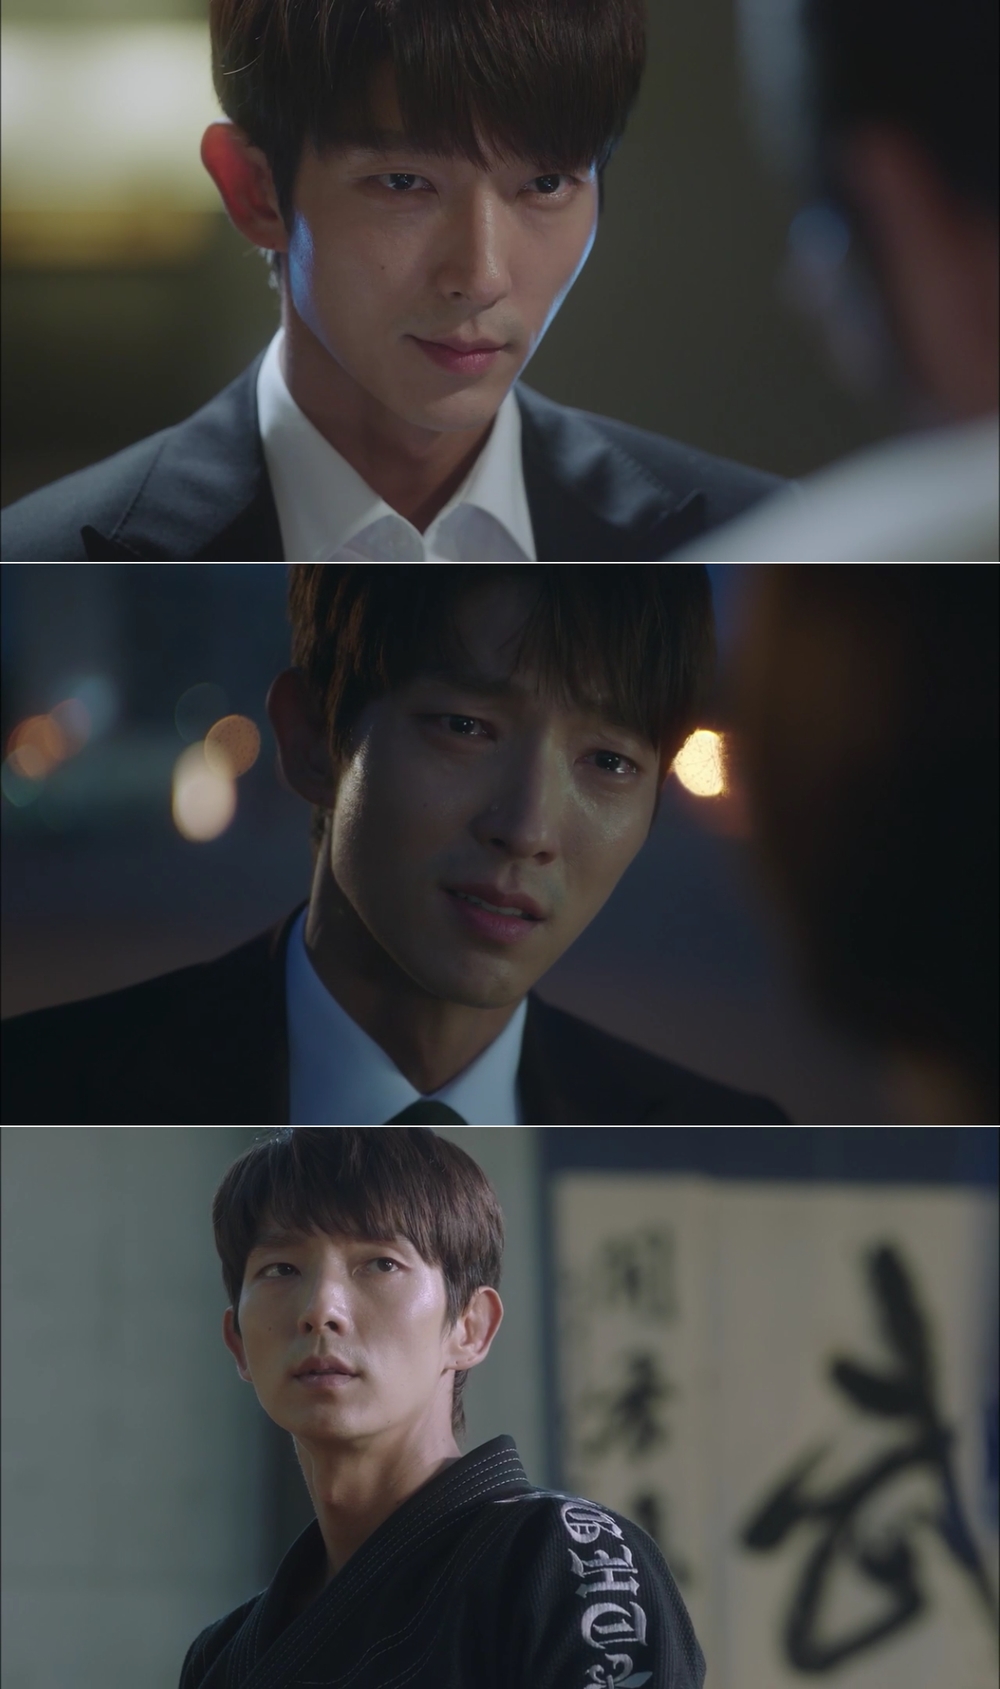 The lawless lawyer Lee Joon-gi has changed.Actor Lee Joon-gi is captivating the house theater as a lawyer Bong Sang-pil, who runs for revenge, aiming at the evil in the TVN Saturday drama Unlawful Lawyer.After taking off the murder of his uncle, Sang-pil, who came out of shock, immediately started counterattacking Cha Moon-sook and An-oh.In the 11th episode broadcast on June 16, however, Noo Joo (Choi Min-soo) testified in court for the innocence of the epitaph, but the epitaph accurately read the black inner circle behind it.Because Jae (Ha Jae-i) was not able to deal with An-ohju itself, he went to An-ohjus office and predicted what would happen in the future.The tension of the house theater rose sharply when the smiley face, which was easy to relax, put a cold expression on the face for a moment and pressed the anoju.Accept the innocence of the essay. There was also suspicion about the Lee Hye-Yeong who ordered Jae.Sang-pil had put the gold medal as a secret agent following Cha Moon-suk and received the fact that he was seeking the position of Chief Justice of the Supreme Court.The release of a photo suggesting that Cha Moon-sook was deeply related to the Golden City union leaders case, which went missing 18 years ago, caused a stir, but the repercussions did not slow down the tension.Bong Sang-pils step to protect revenge and Jae-yi continued without hesitation, and he politely expressed his intention not to meet with Jae-yi to Noh Hyun-joo, who is not sure of his identity.Noh Hyun-joo said that she was the mother of Shin Yi Jae, and she was shedding hot tears.Without Noh Hyun-joo, the tears of the mourning that melted the worries about surprise, gratitude and Jae-yi made the viewers eat because the mourning was not able to escape from the grasp of Cha Moon-sook.Soon, Sang-pil considers a new choice to protect Jae-yi. Sang-pil and Jae-yis expressions, which found the Ji-jitsu seal, were in conflict.Jae-yi, who is excited about dating for a long time, and Dalian, who is making a dark expression watching it, made the future of the two people foresee.bak-beauty